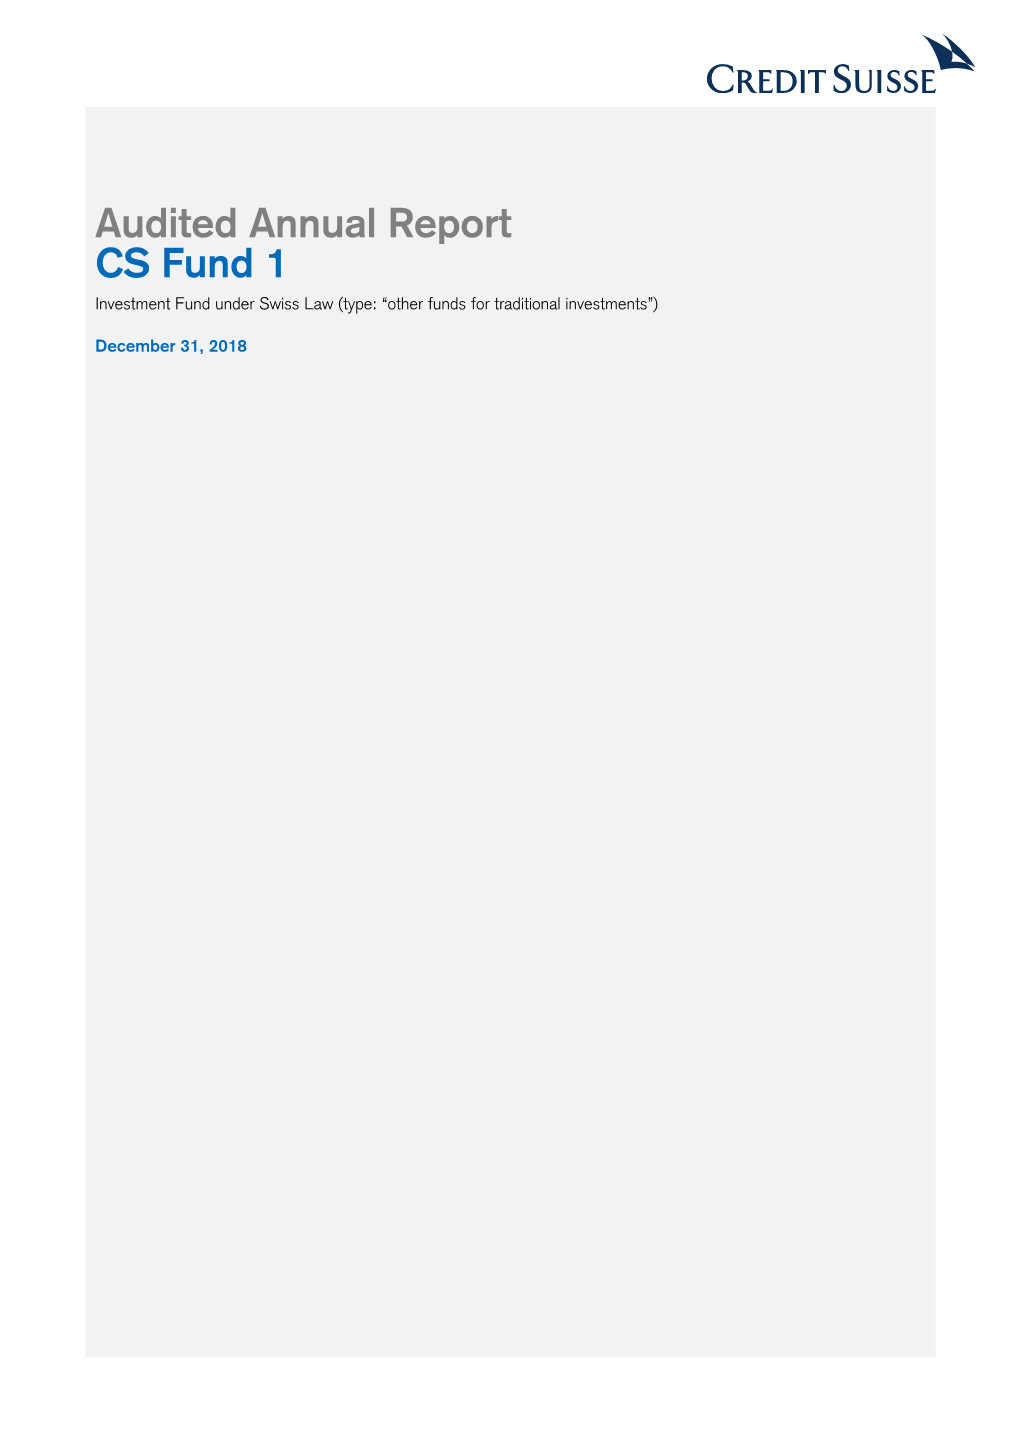 Audited Annual Report CS Fund 1 Investment Fund Under Swiss Law (Type: “Other Funds for Traditional Investments”)